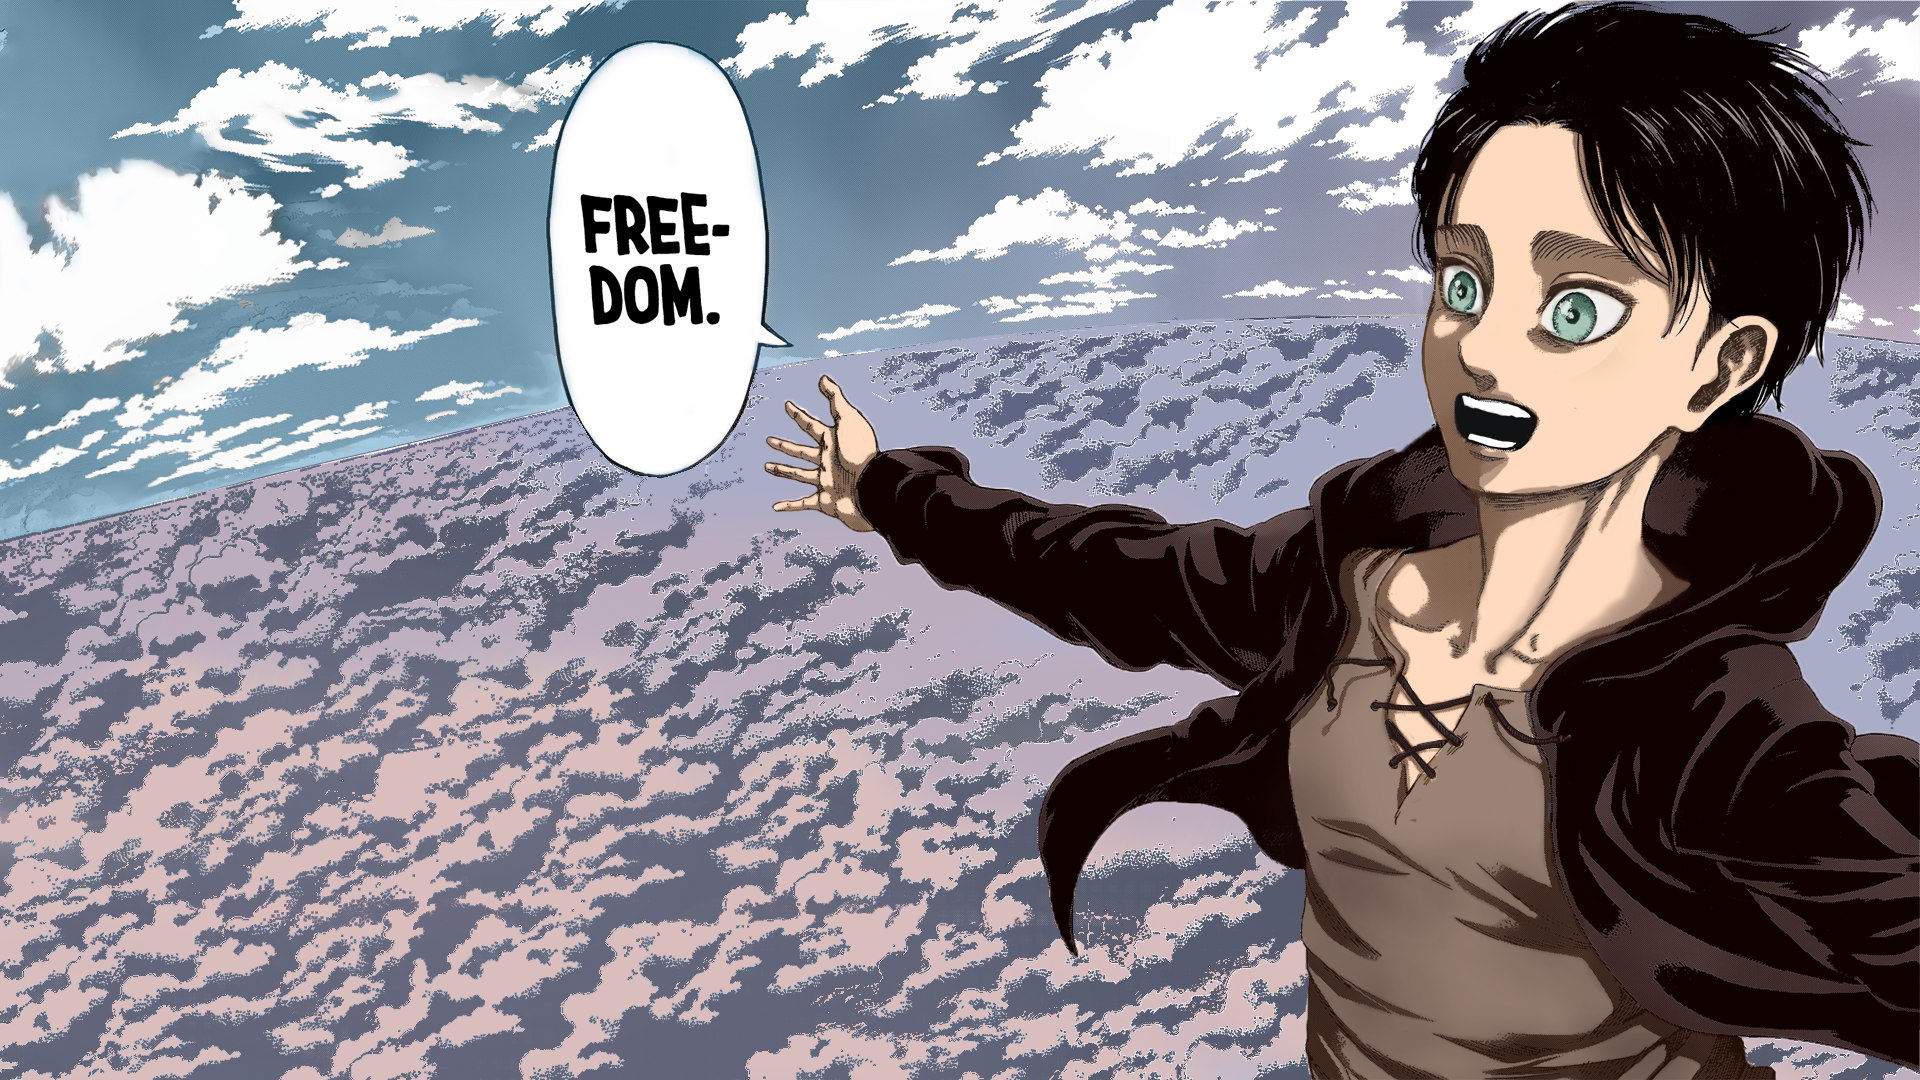 Colorized The F R E D O M Panel And Formatted It For A Desktop